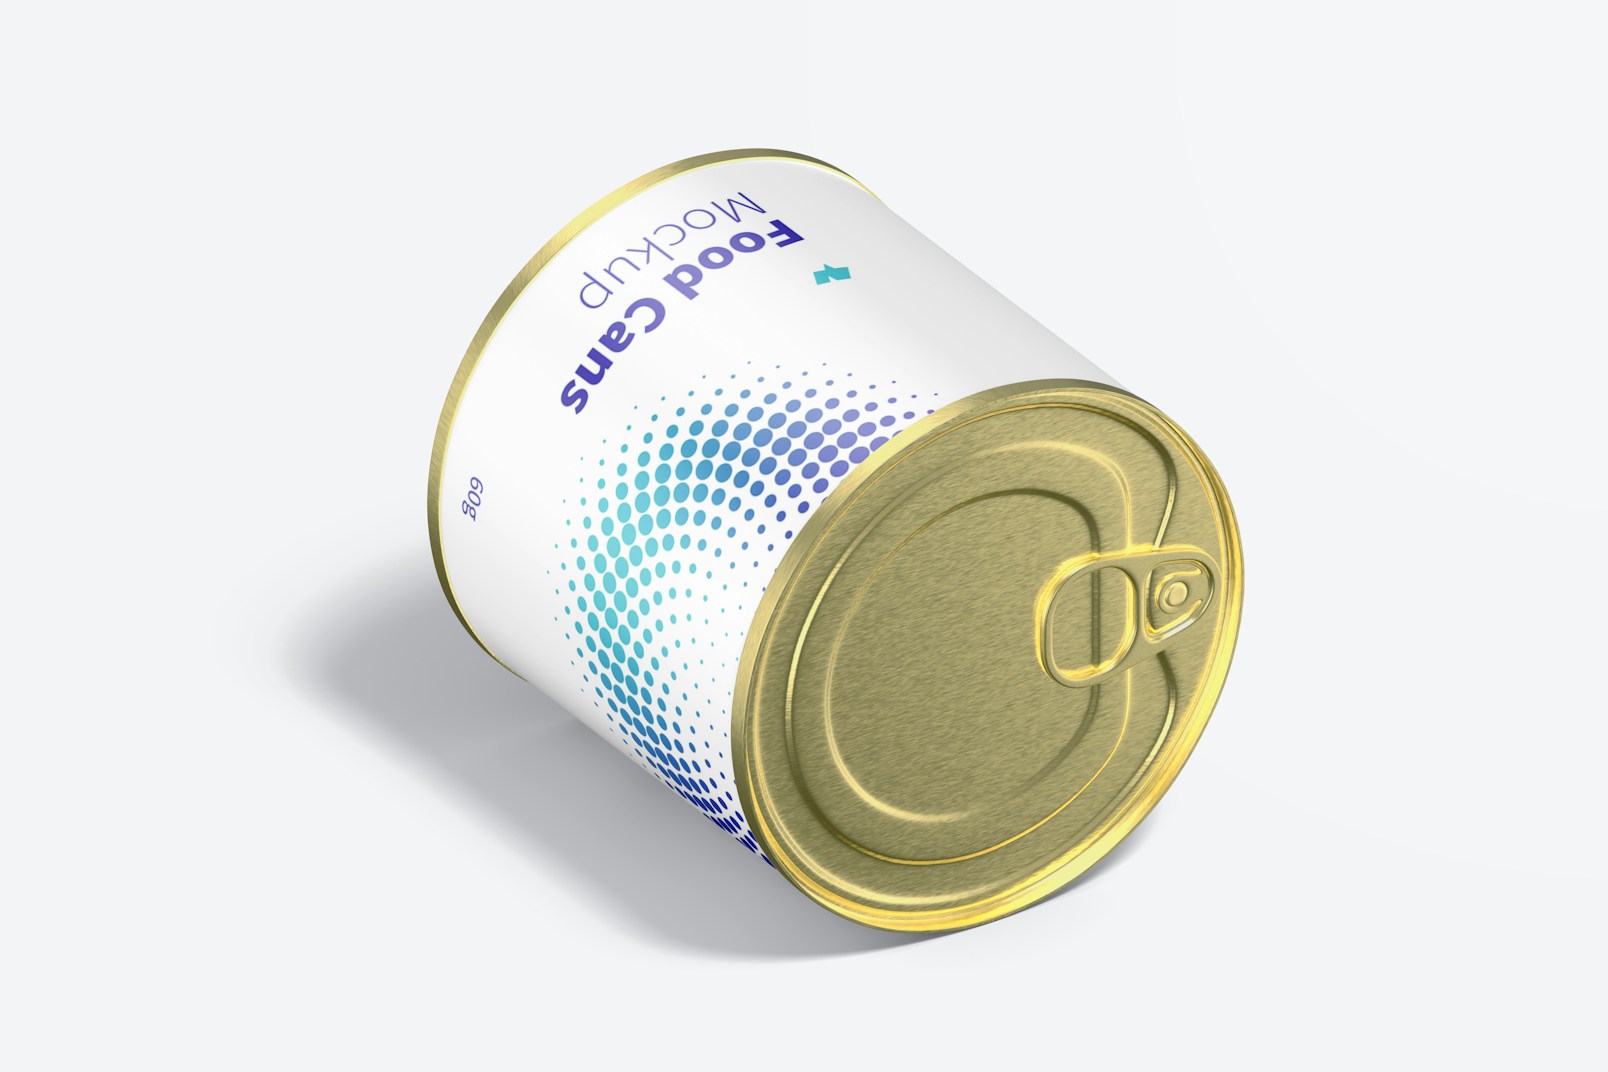 60g Food Can Mockup, Isometric Right View